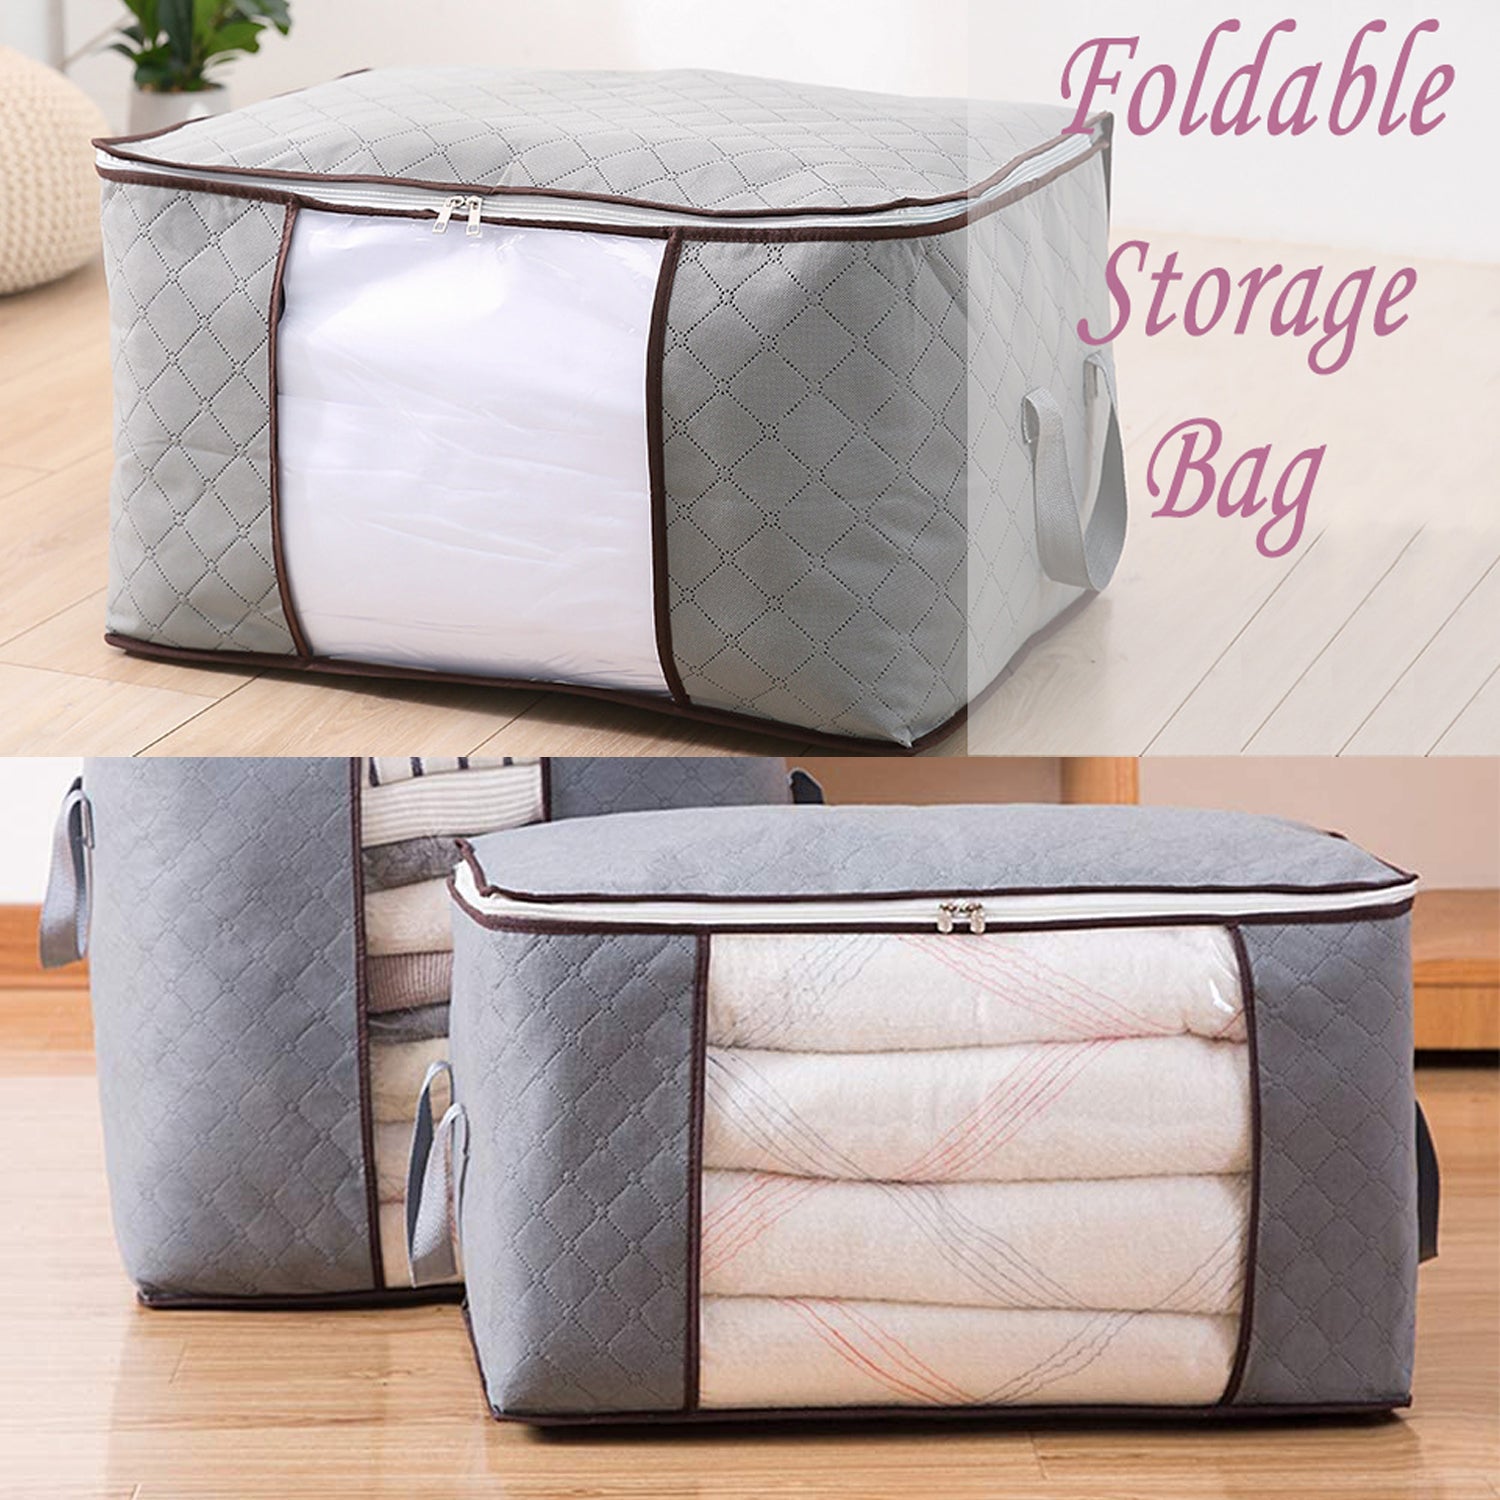 6111 Travelling Storage Bag used in storing all types cloths and stuffs for travelling purposes in all kind of needs.